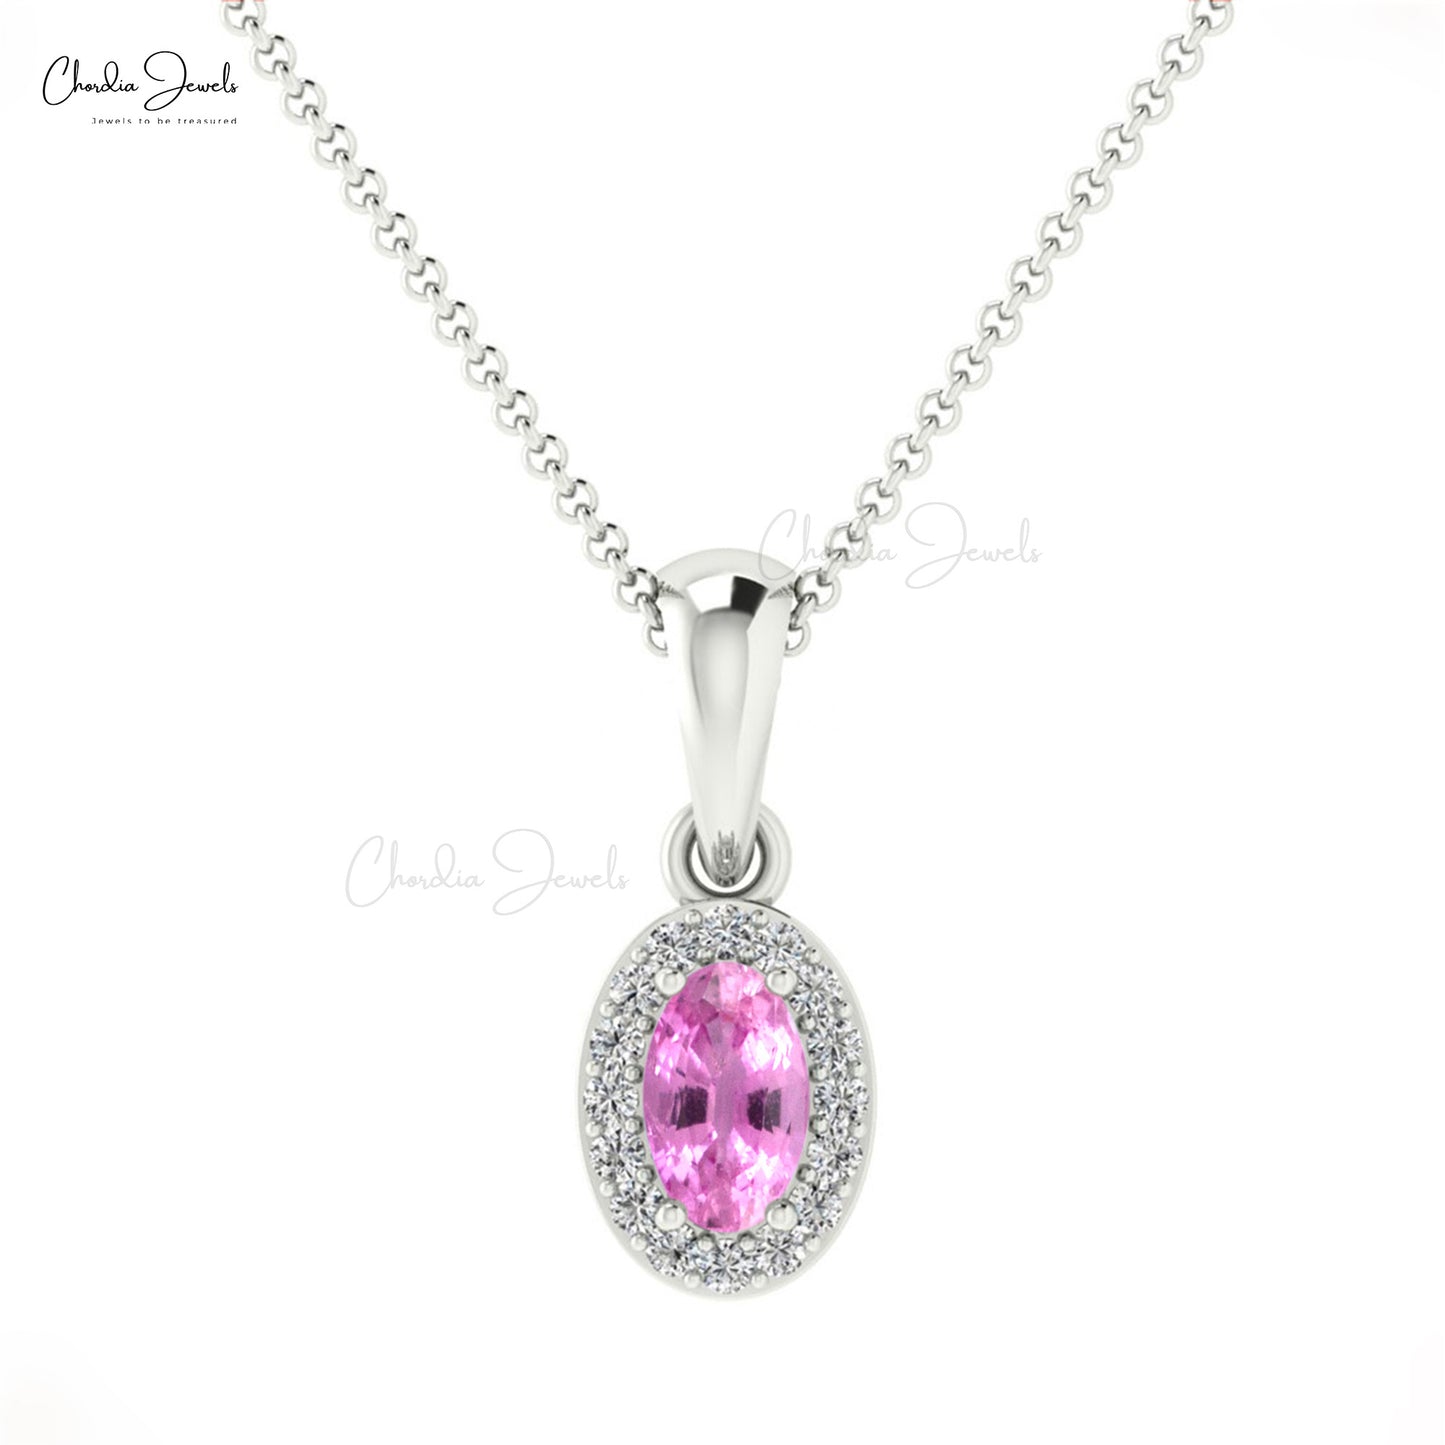 Beautiful Unique Style White Diamond Halo Pendant Necklace Natural Pink Sapphire Gemstone Charm Pendant in 14k Pure Gold Birthday Gift For Sister